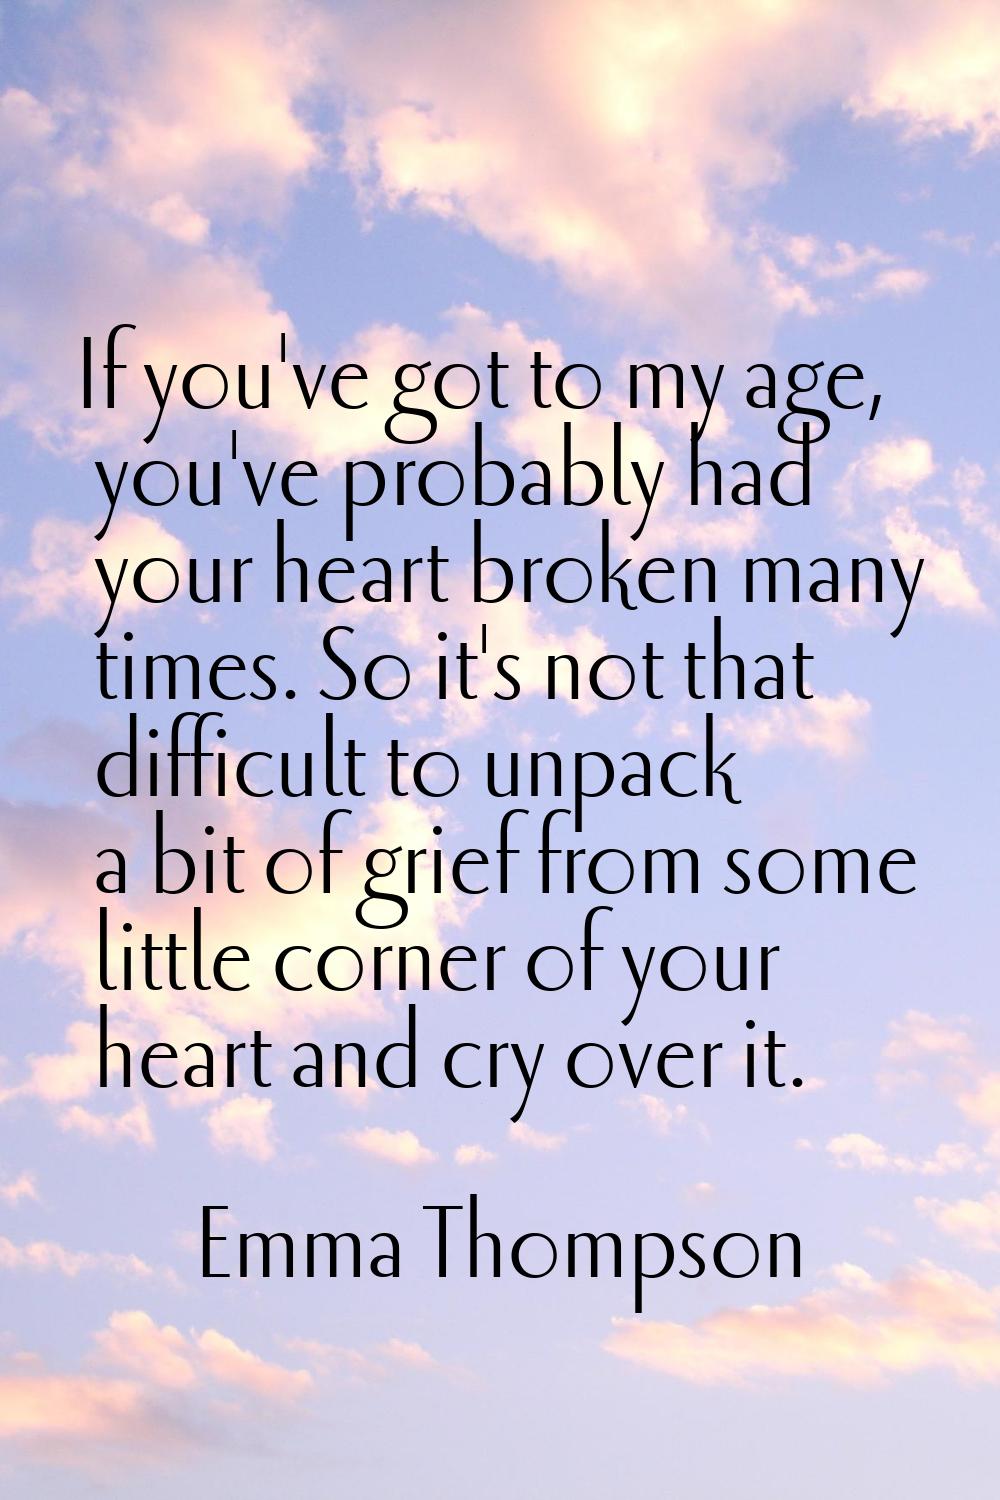 If you've got to my age, you've probably had your heart broken many times. So it's not that difficu